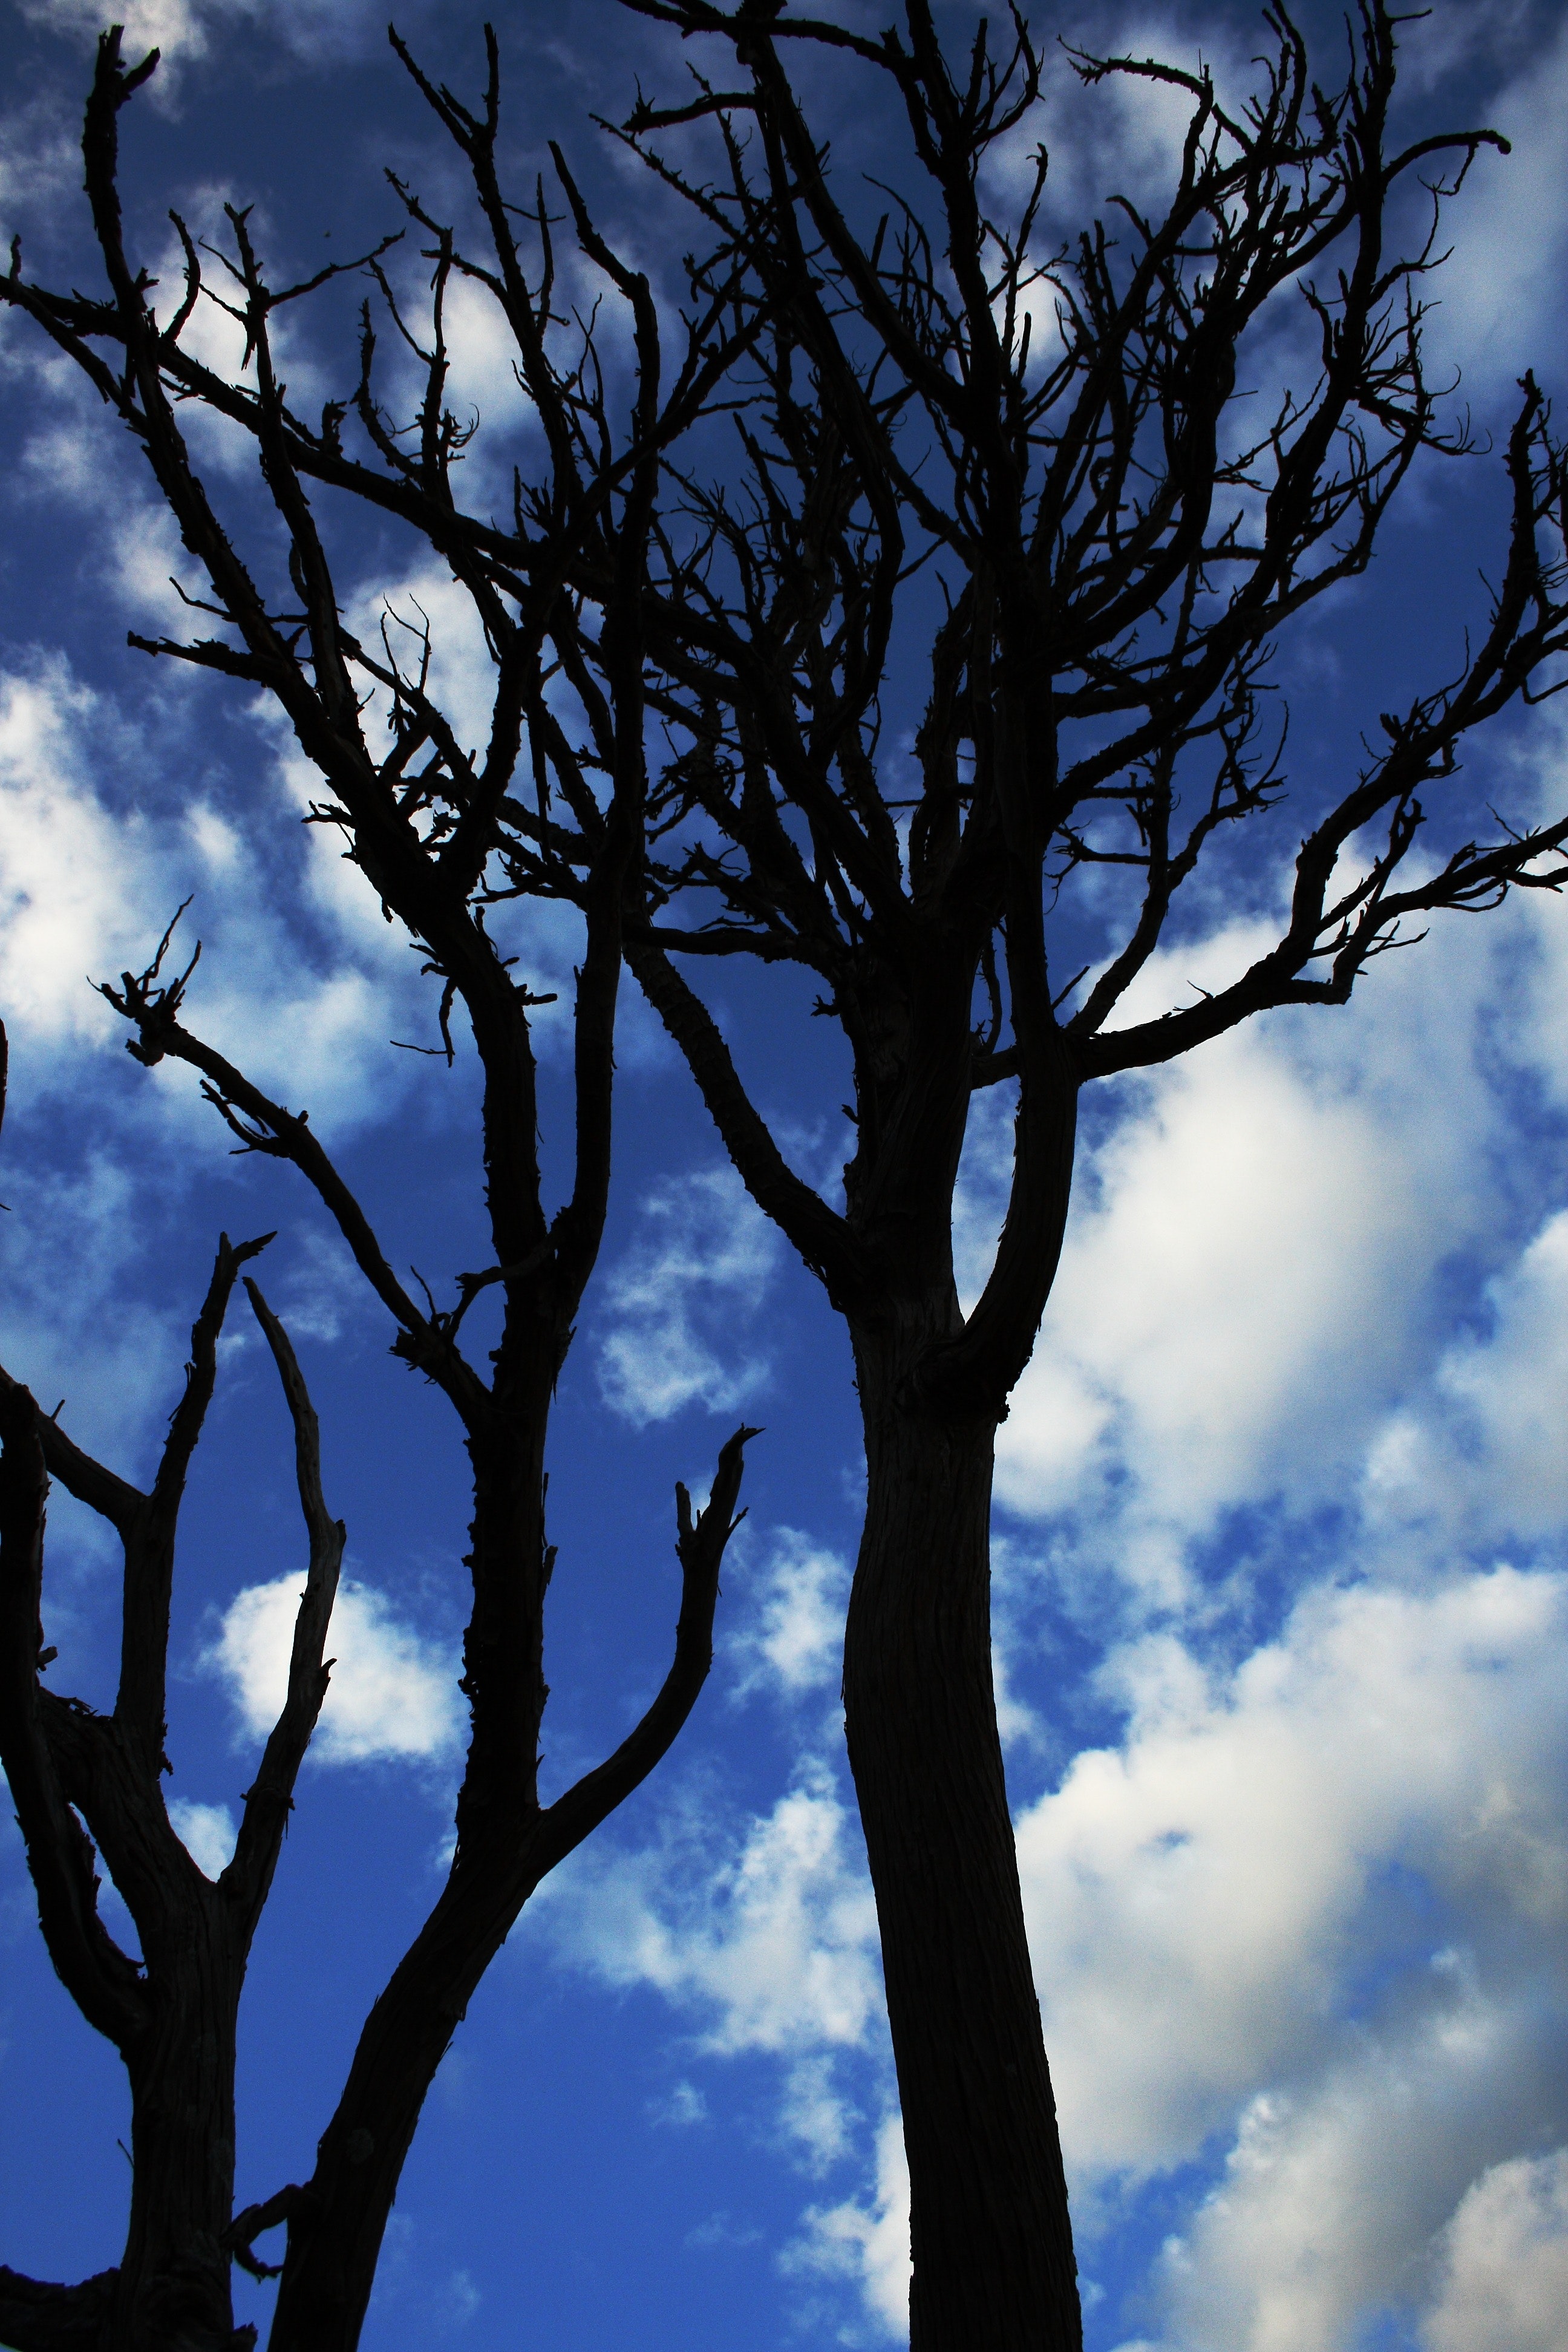 Dead Trees Under White Cloudy Blue Sky, Branches, Clouds, Dead tree, Low angle photography, HQ Photo